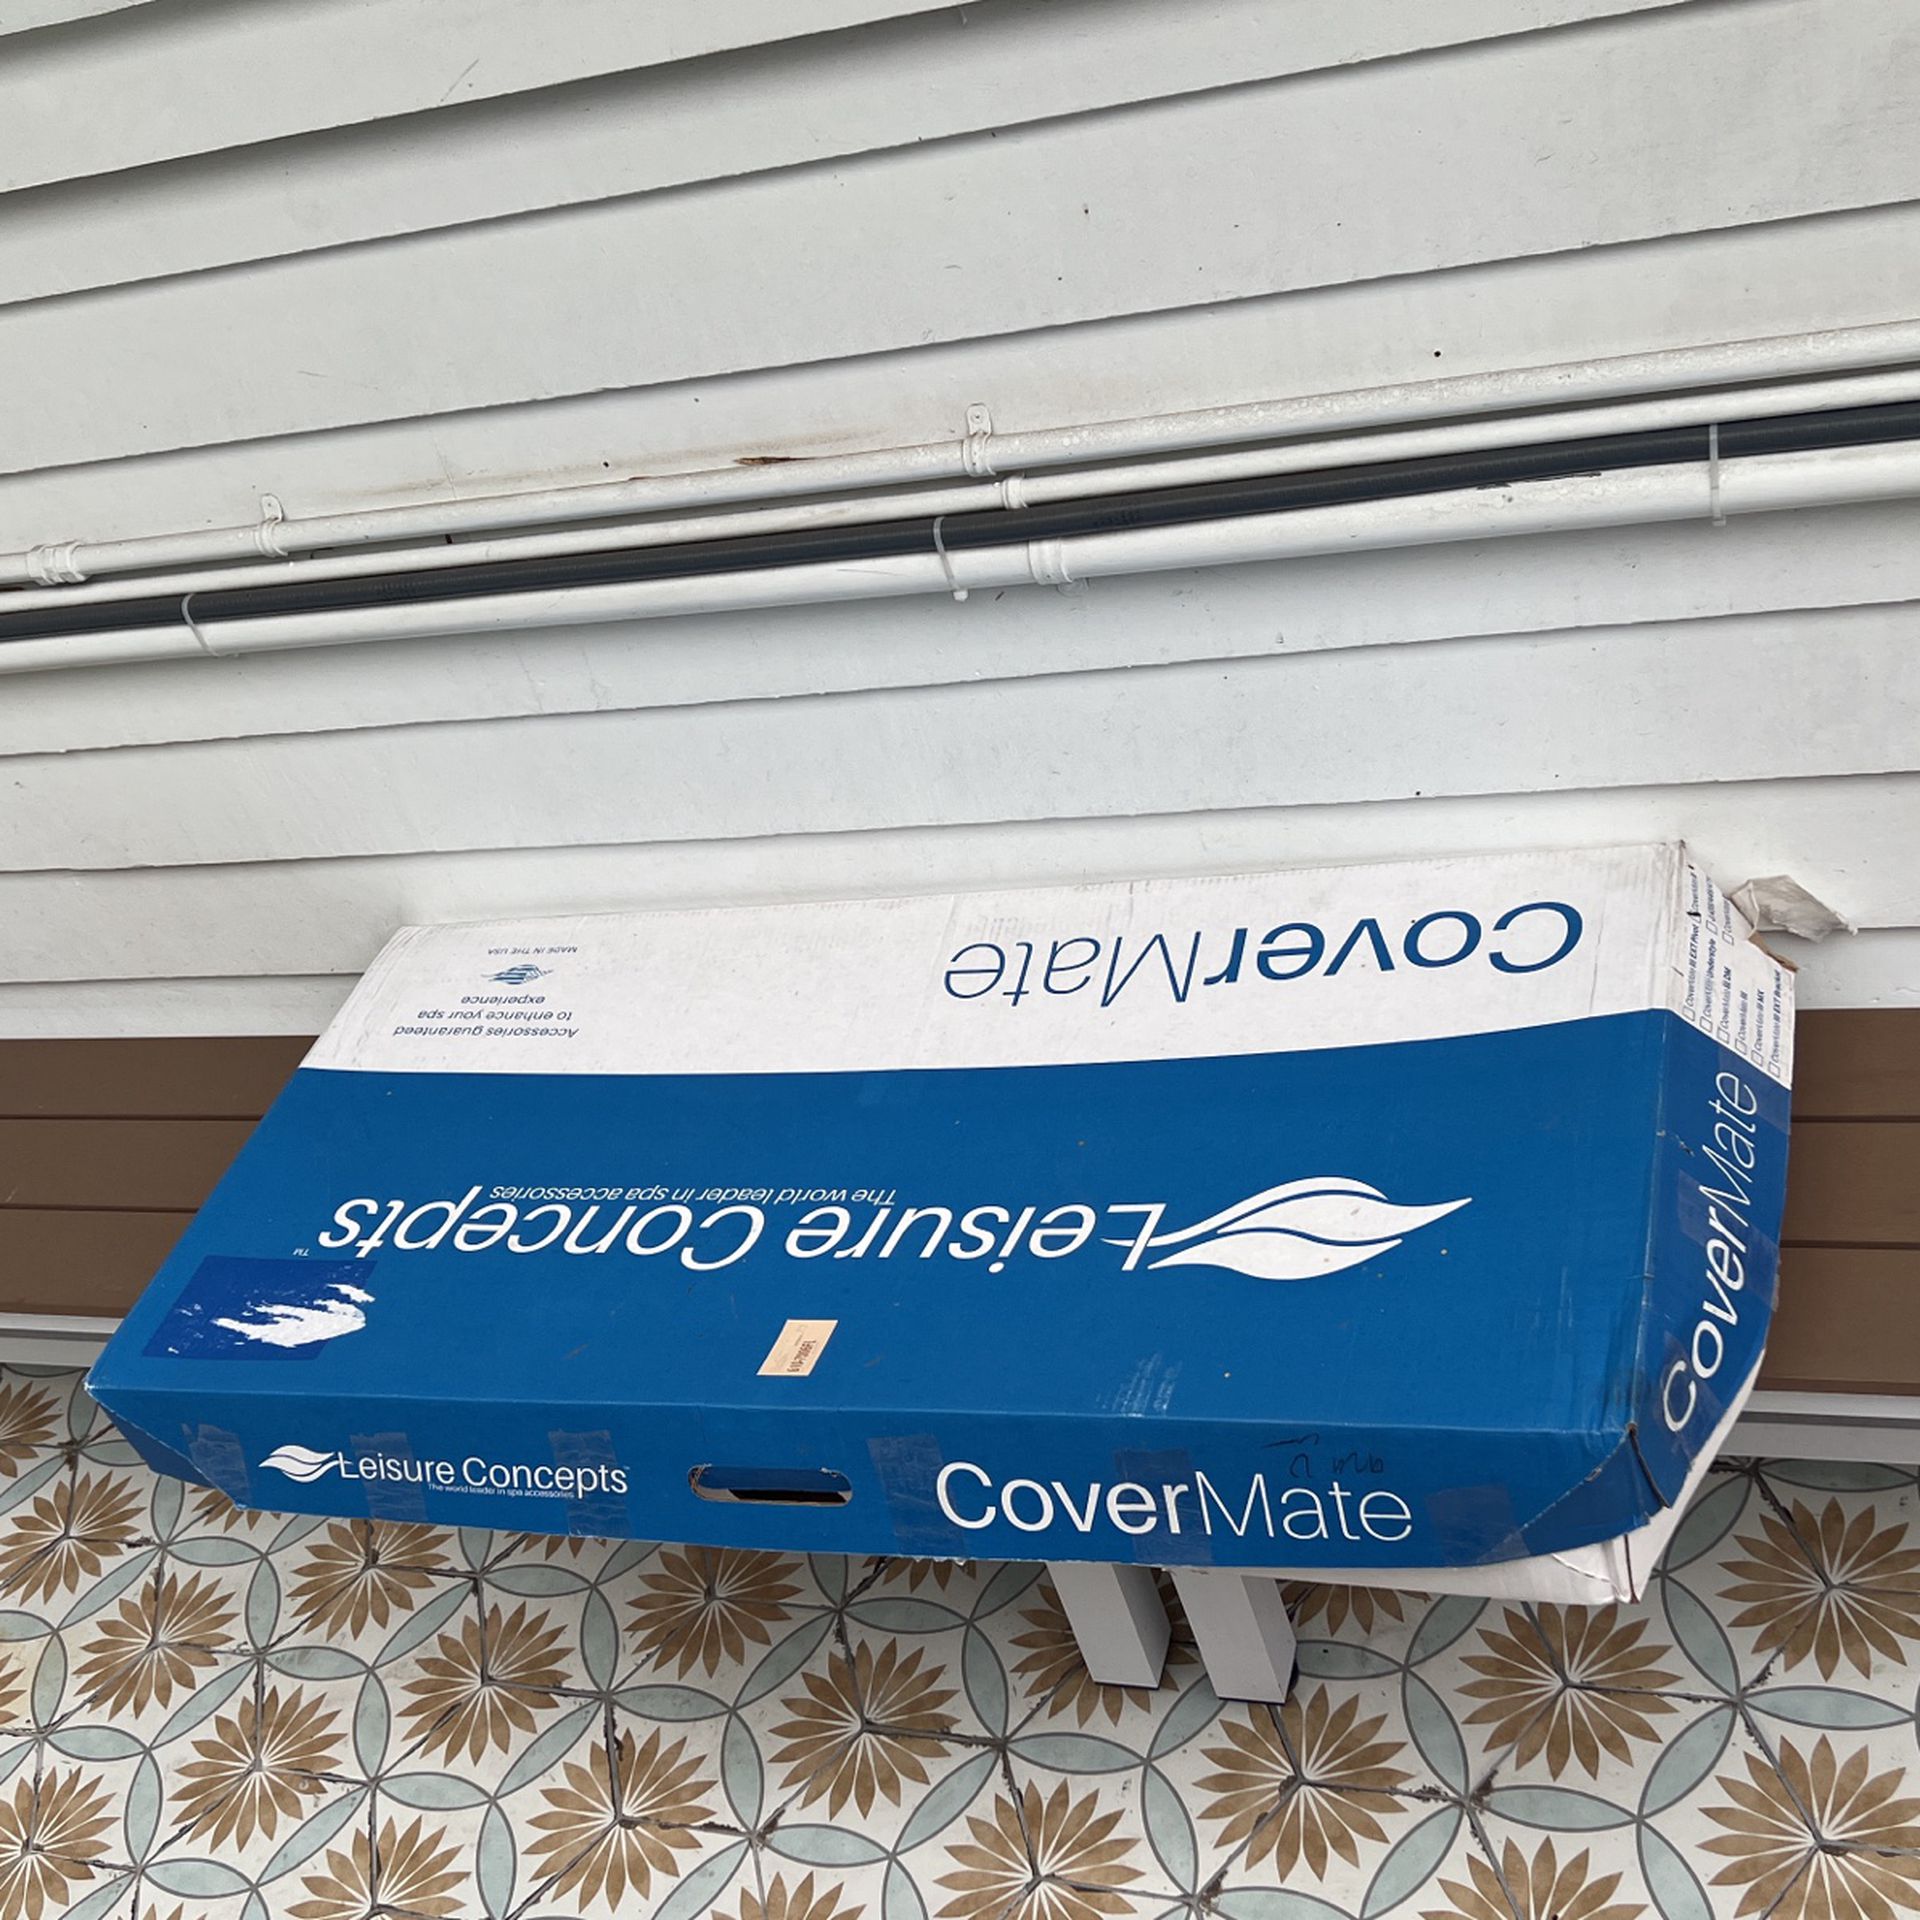 Jacuzzi / Hot Tub / Spa Cover Lifter - CoverMate II (New In Box)